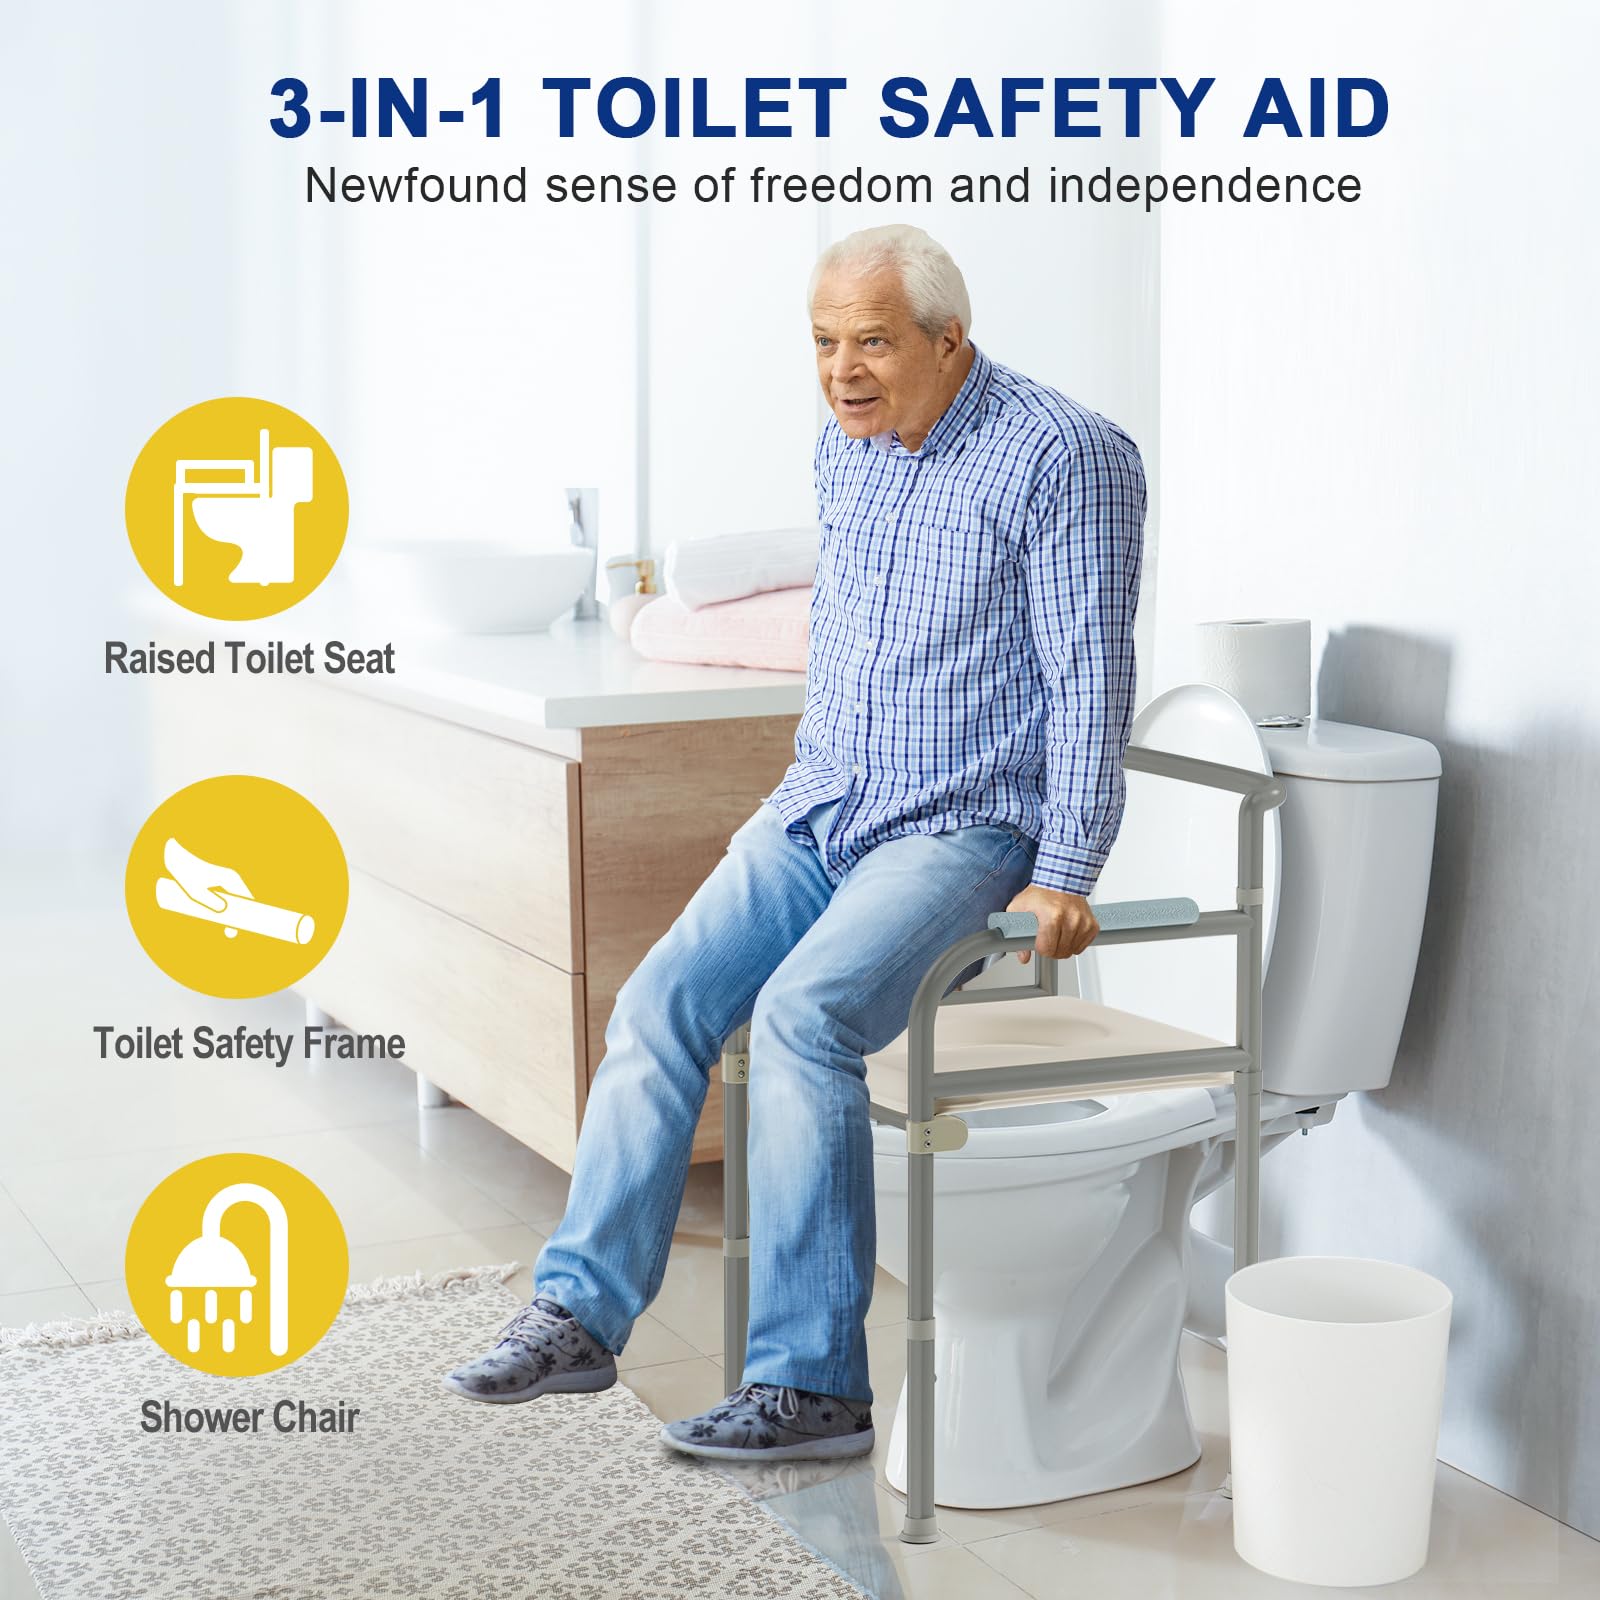 Pipleo Raised Toilet Seat with Handles - Cozy Padded Toilet Seat Risers for Seniors, Handicap - Multi-use as Bedside Commode, Shower Chair and Safety Frame, Adjustable Height, 330lbs Capacity (Grey)